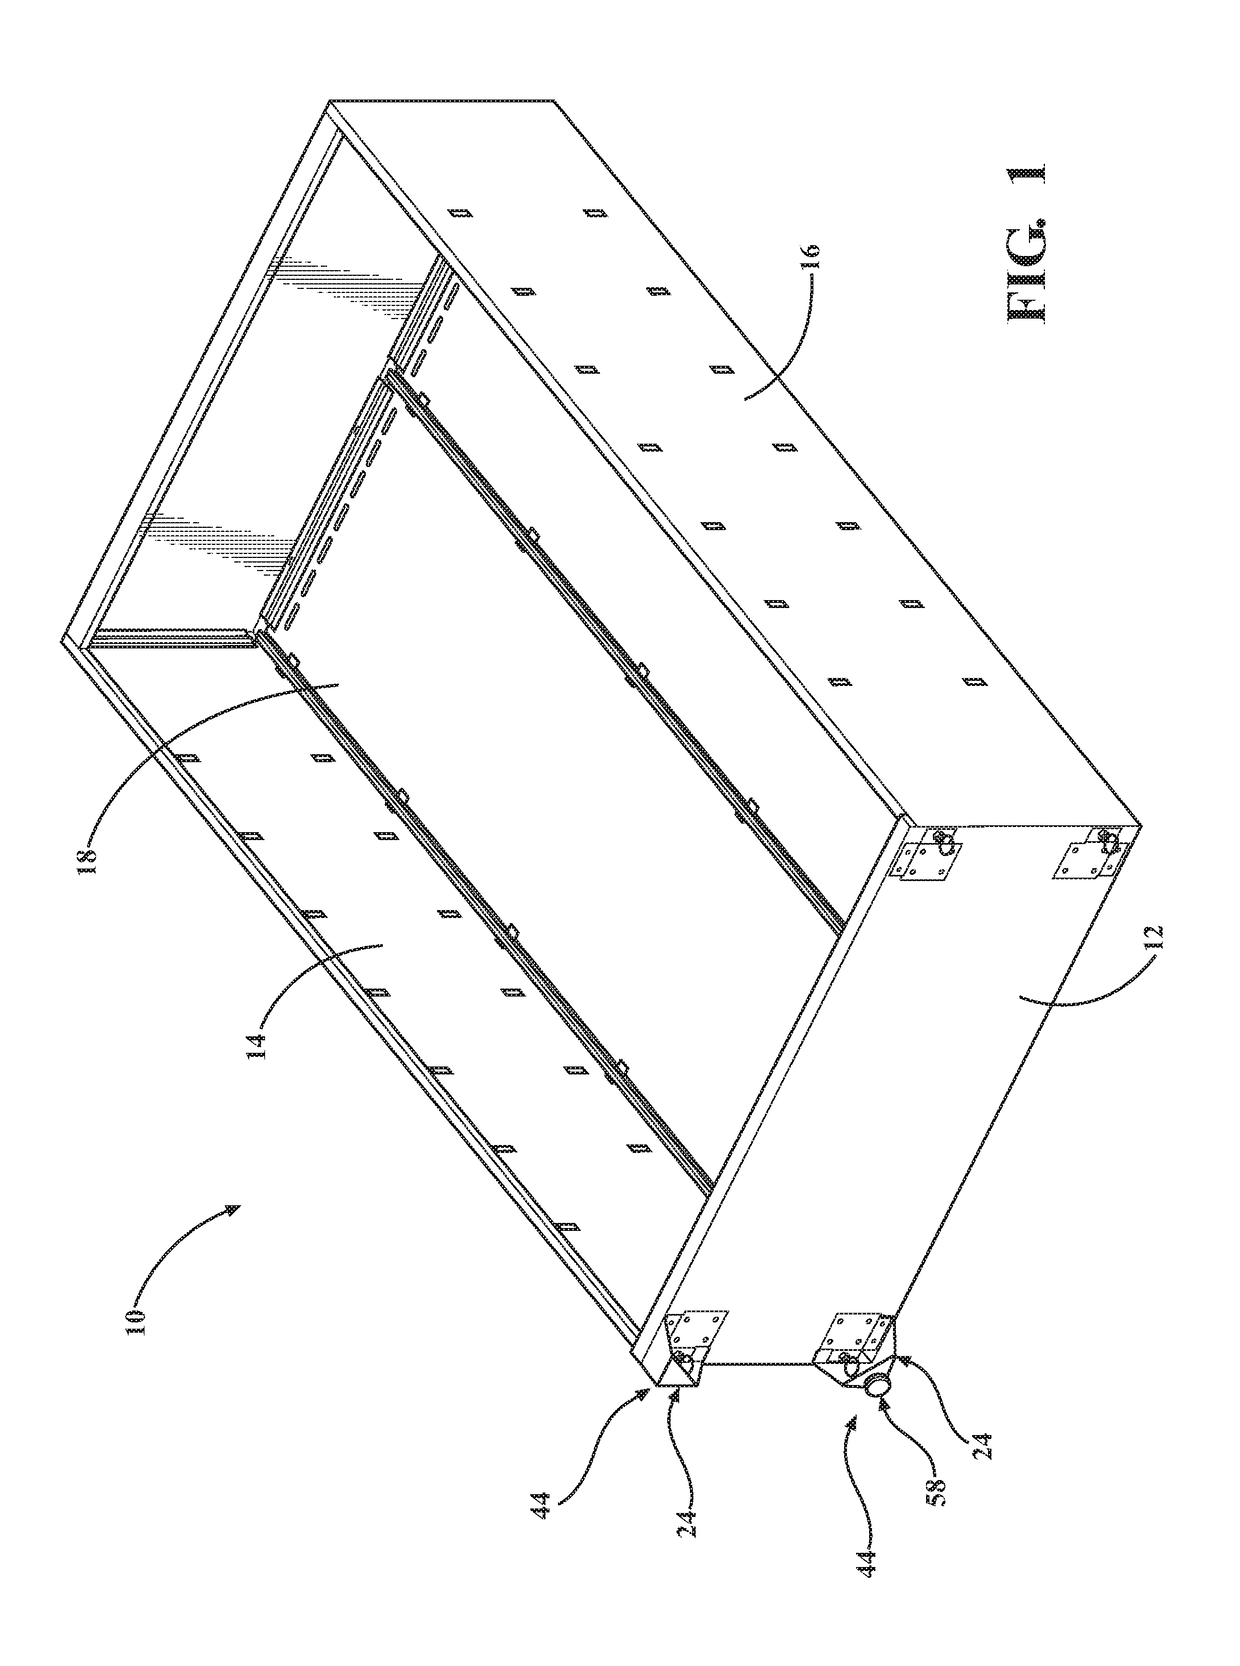 Cabinet Assembly Having a Releasable Support Foot